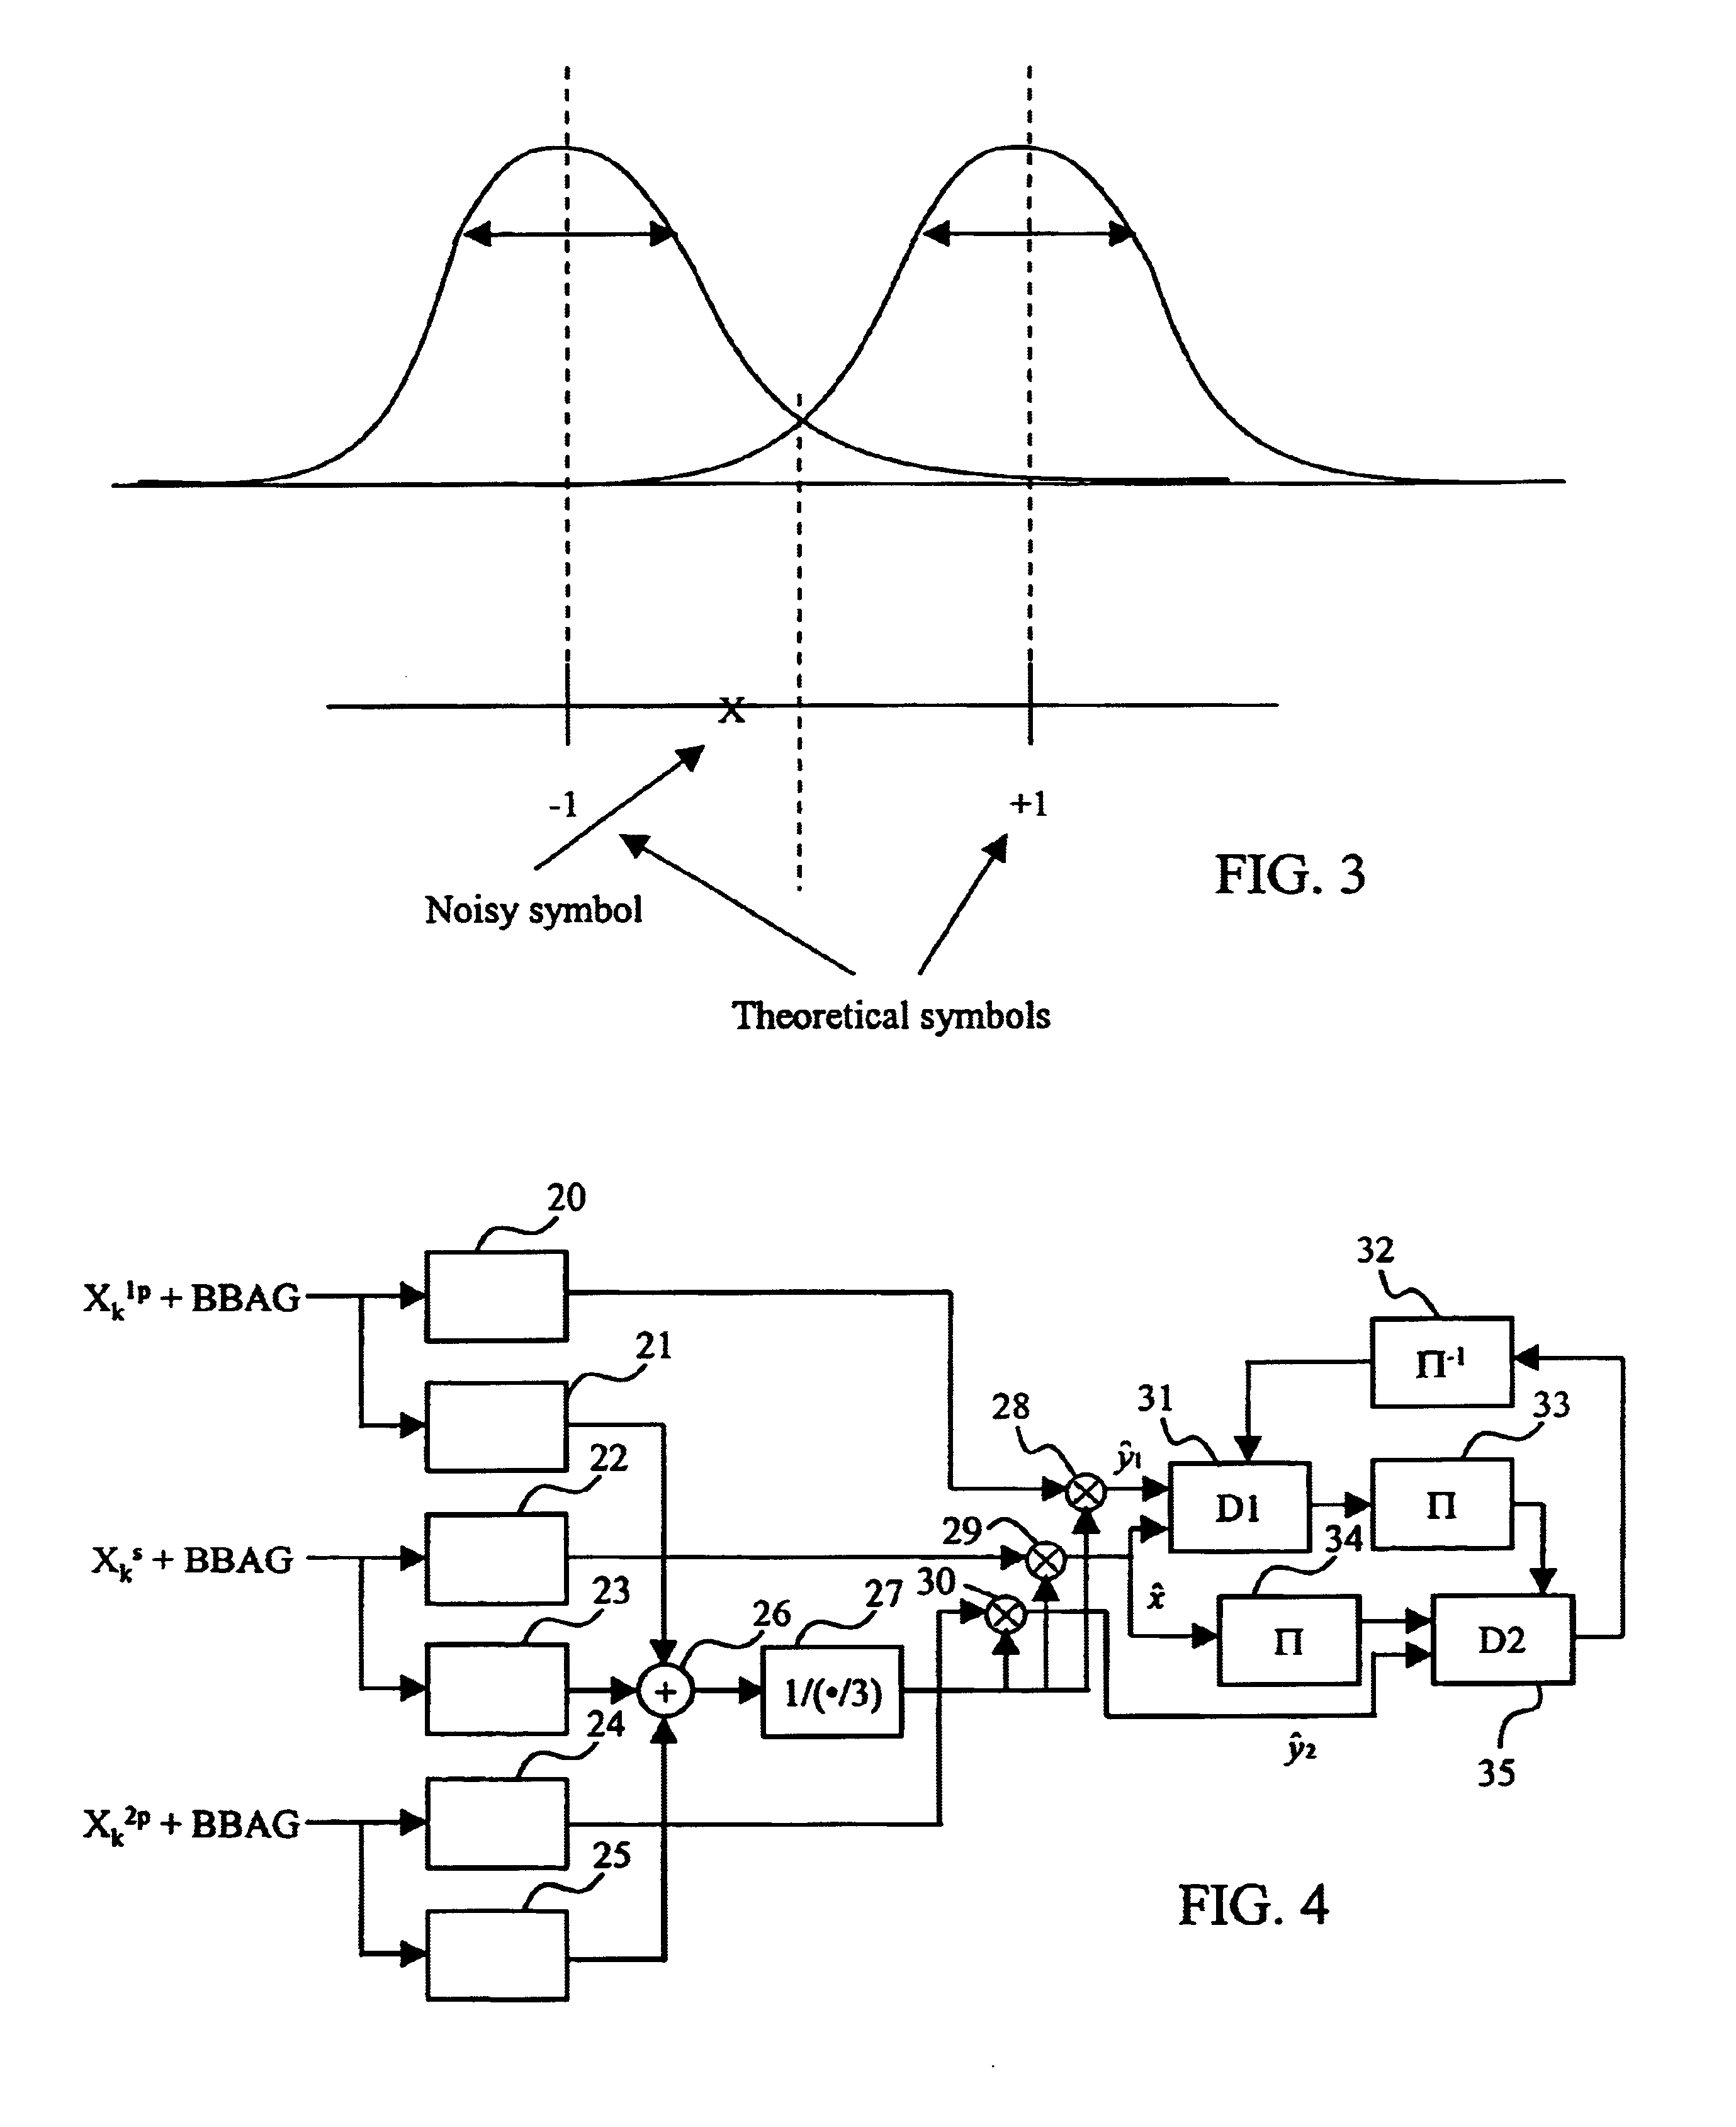 Method and device for evaluating the noise associated with turbocodes, and systems using them